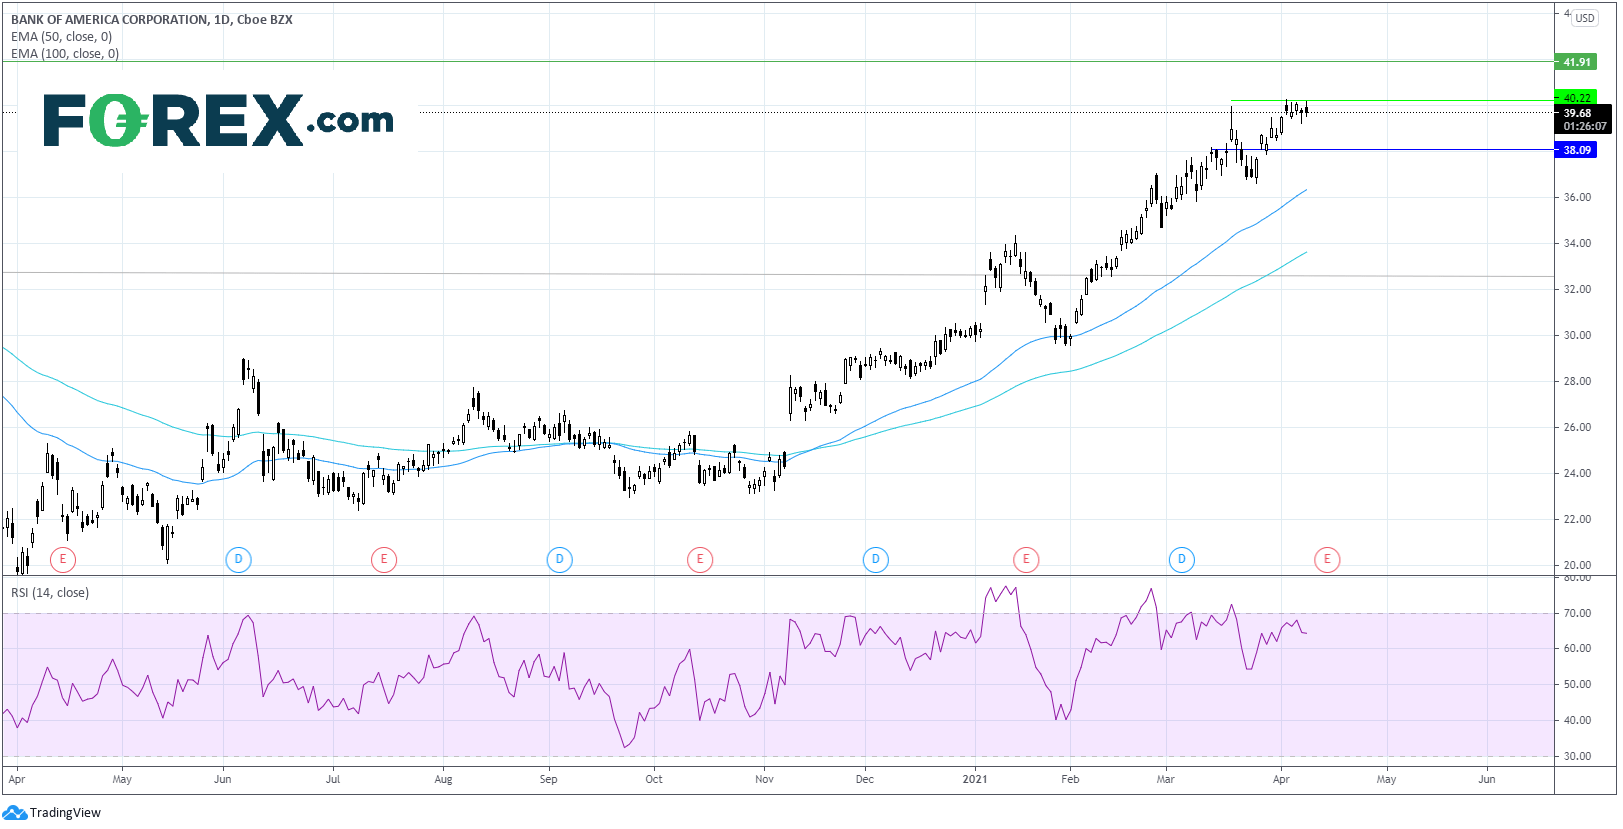 Chart analysis of Bank of America: U.S Q1 Bank Earnings. Published in April 2021 by FOREX.com